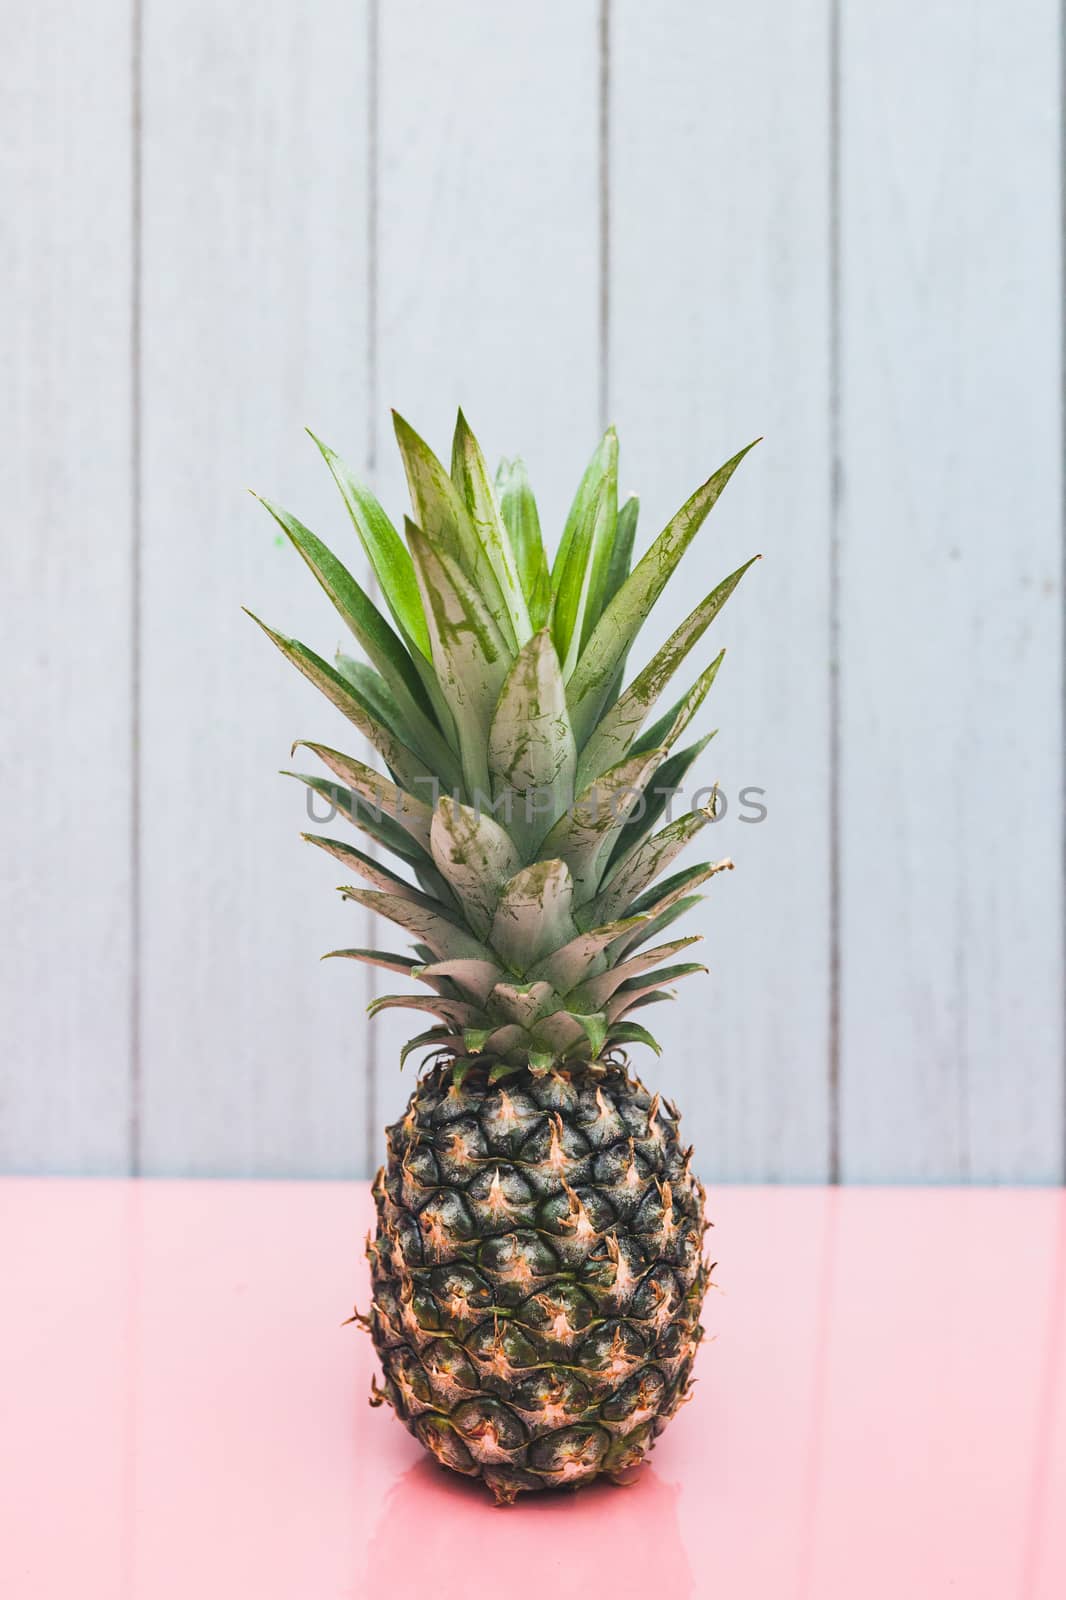 Pineapple on a blue pastel background by nopparats